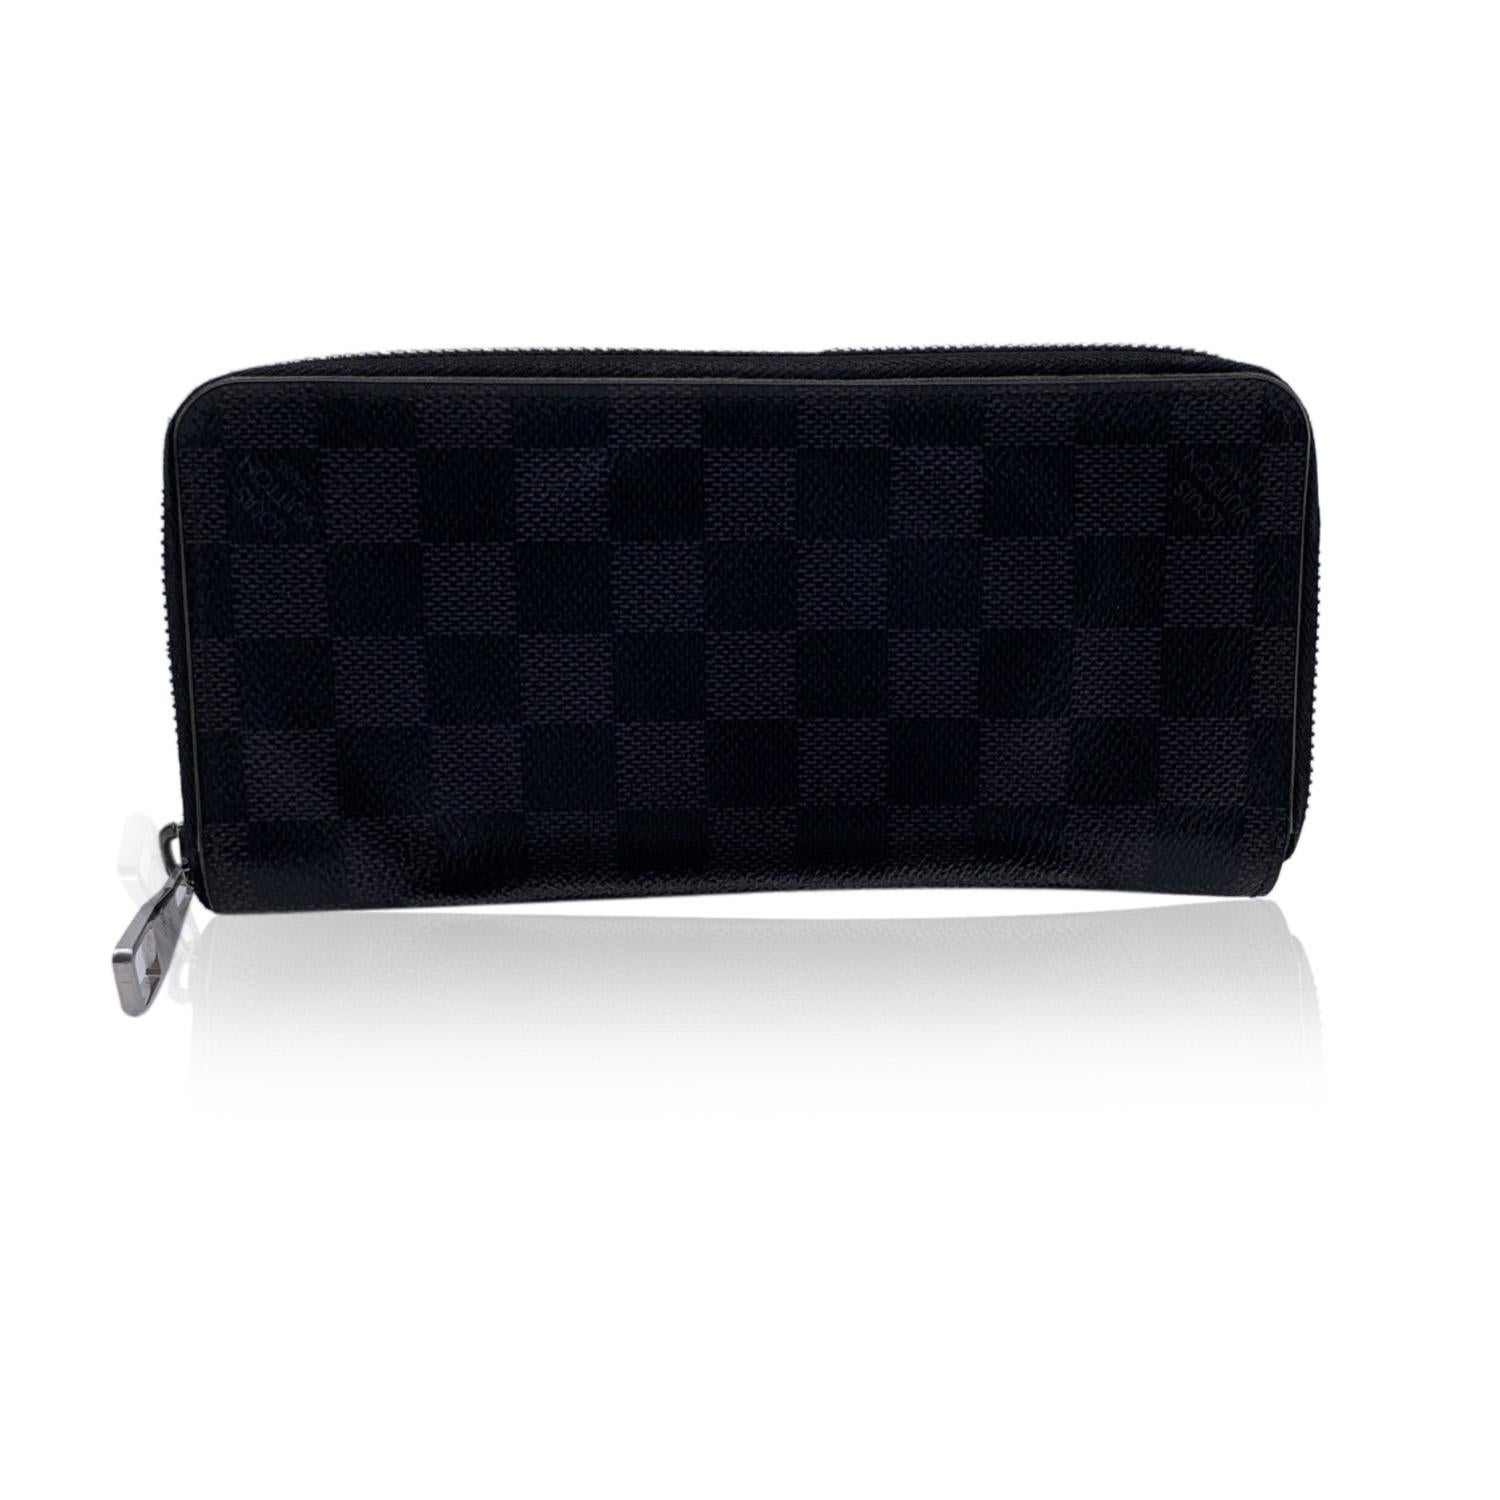 LOUIS VUITTON Damier Graphite Zippy Wallet. Zip closure. It features 2 open pockets, 1 zip coin compartment, 3 flat open pocket. 14 credit card slots. 'LOUIS VUITTON Paris - made in Spain' embossed inside. Authenticity serial number CA2178 embossed